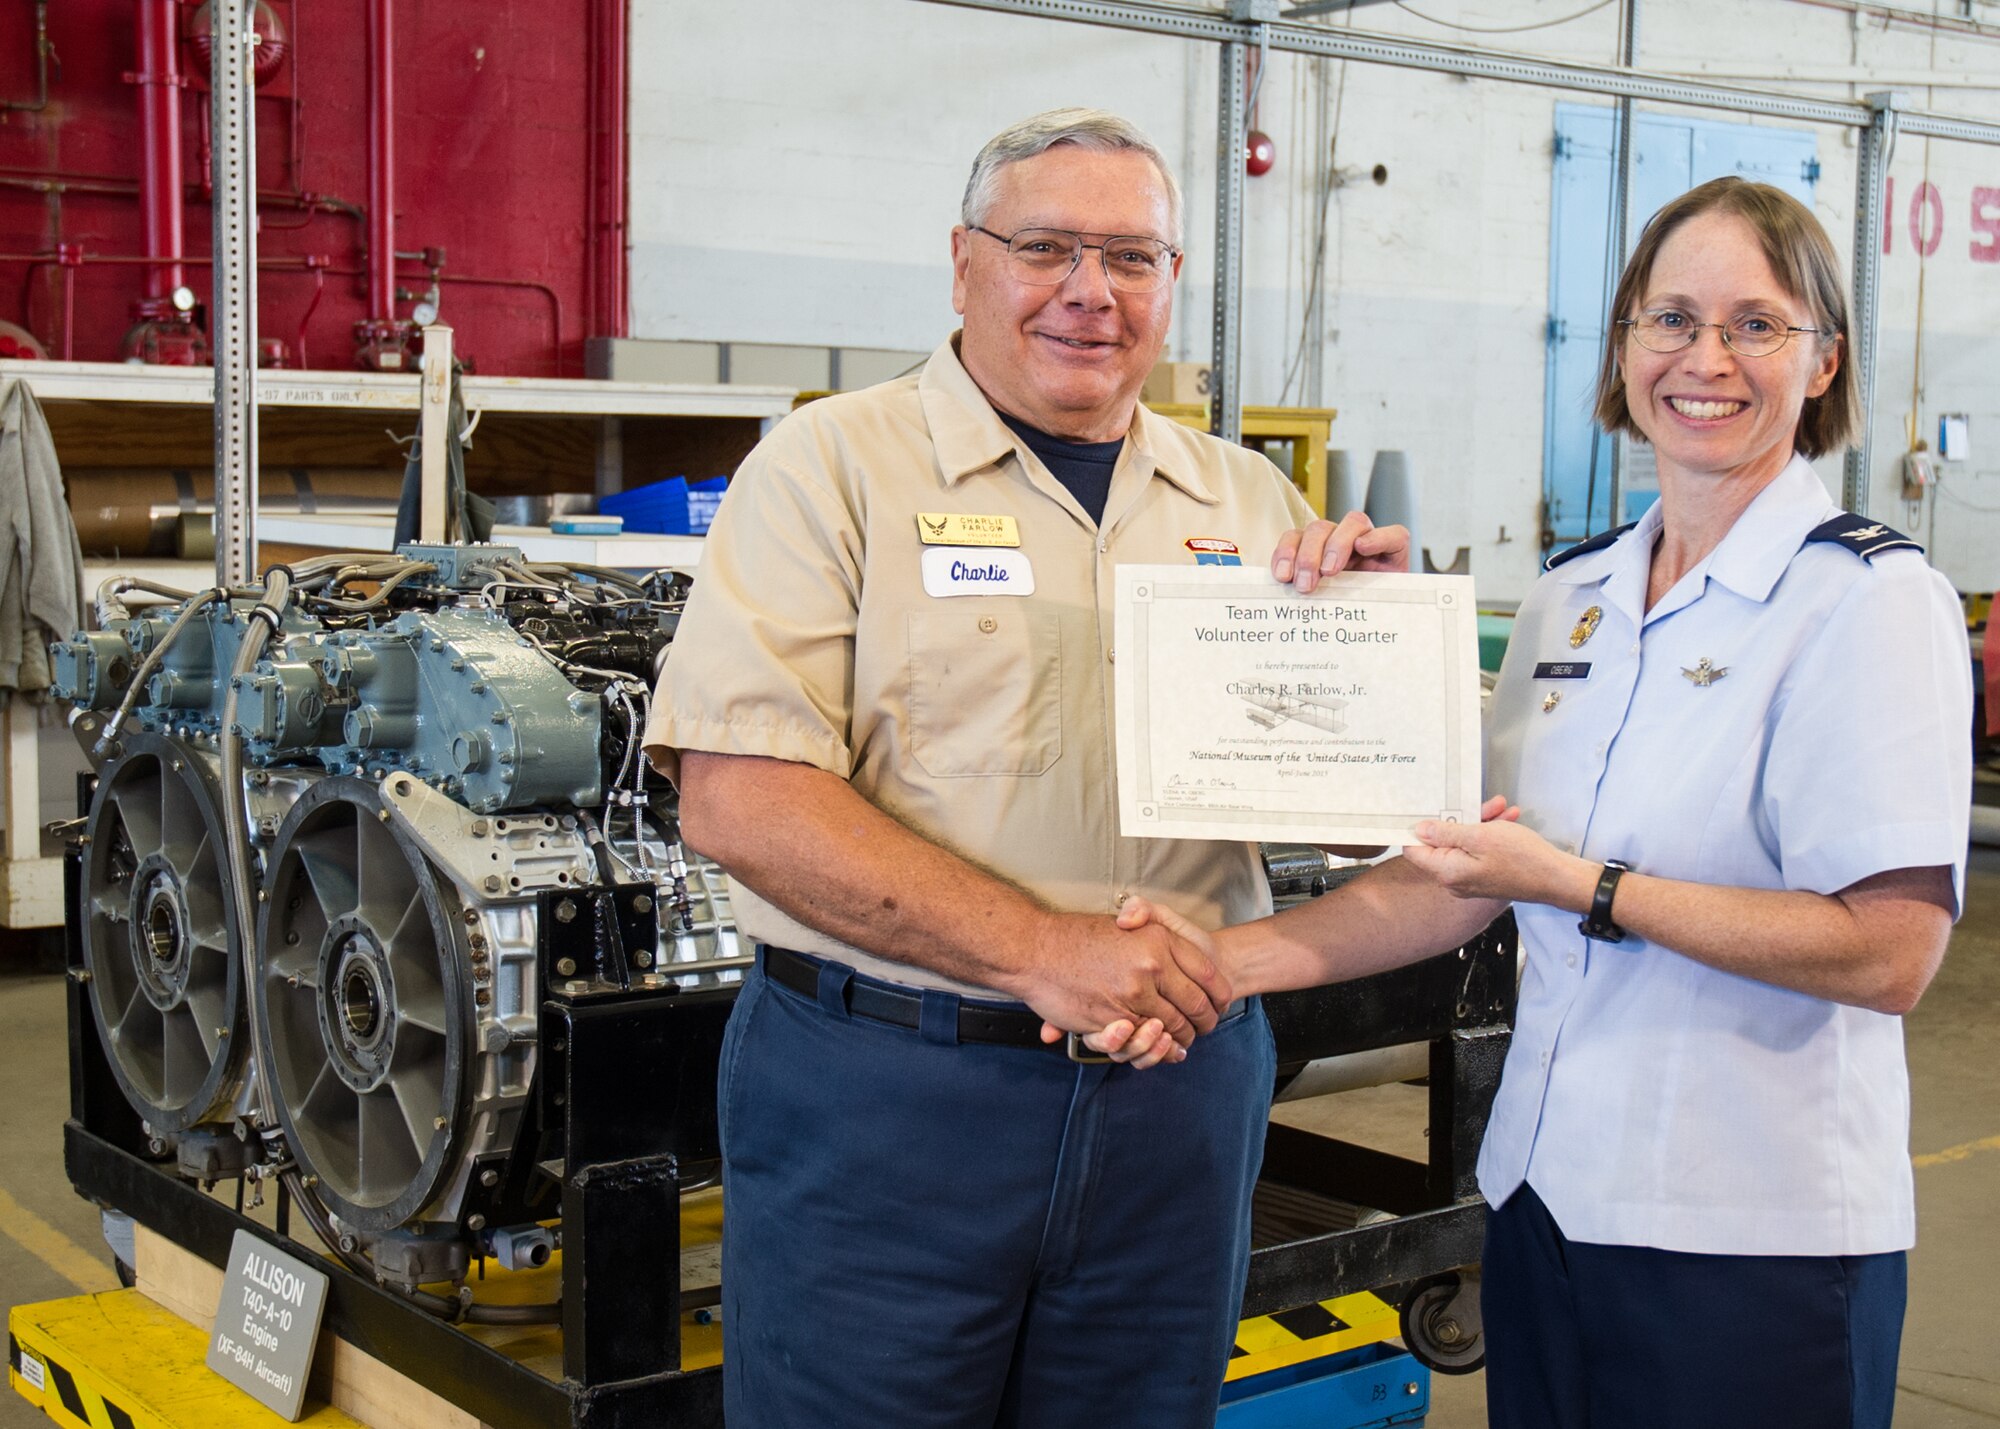 DAYTON, Ohio -- 88th Air Base Wing Vice Commander Col. Elena M. Oberg presents Huber Heights resident Charles Farlow Jr. with the Team Wright-Patt "Volunteer of the Quarter" award for the second quarter of 2015 on Sept. 14, 2015. (U.S. Air Force photo)  